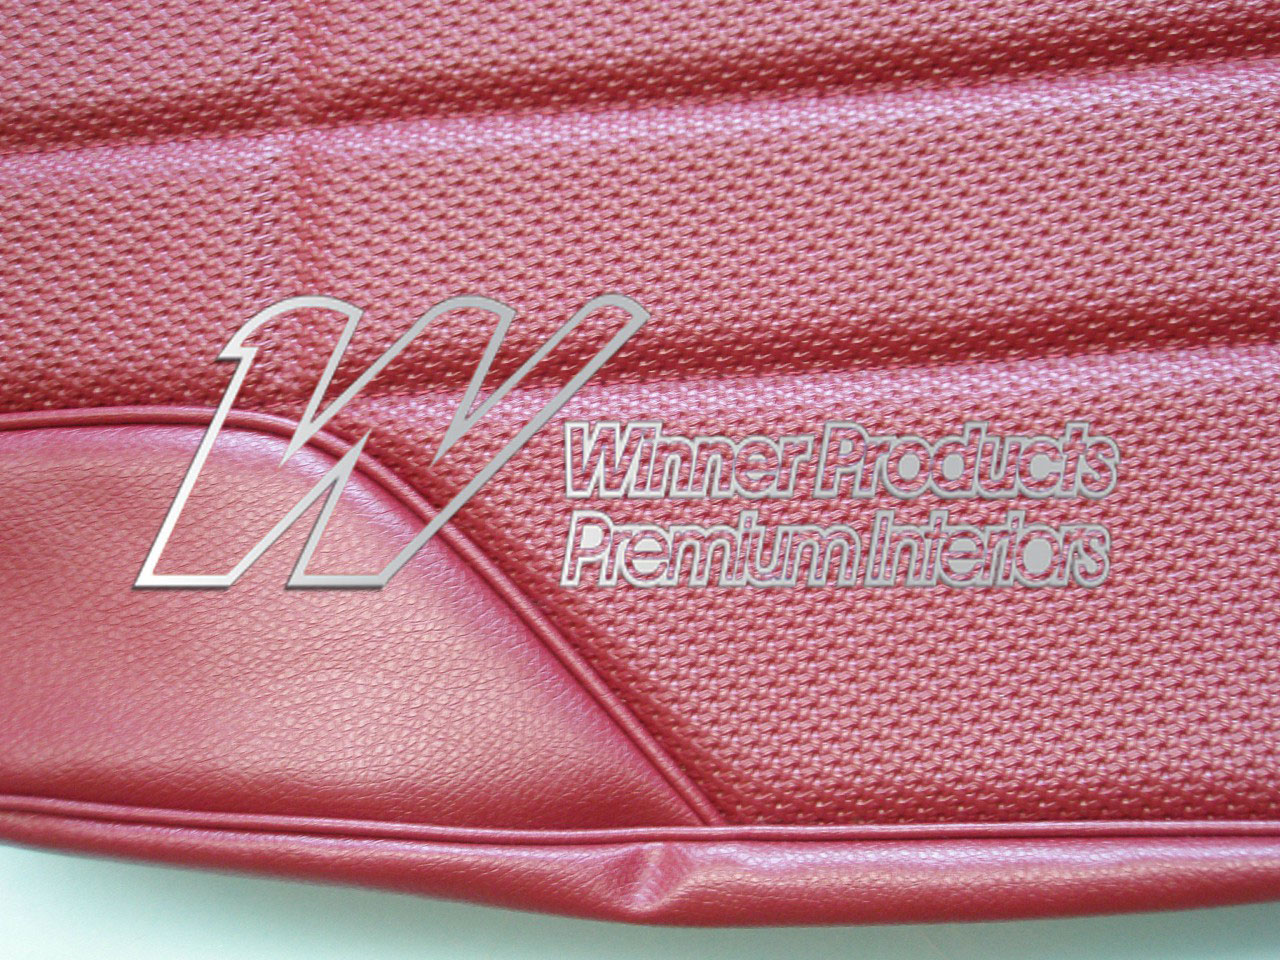 Holden Monaro HT Monaro GTS Coupe 12X Morocco Red Seat Covers (Image 16 of 16)